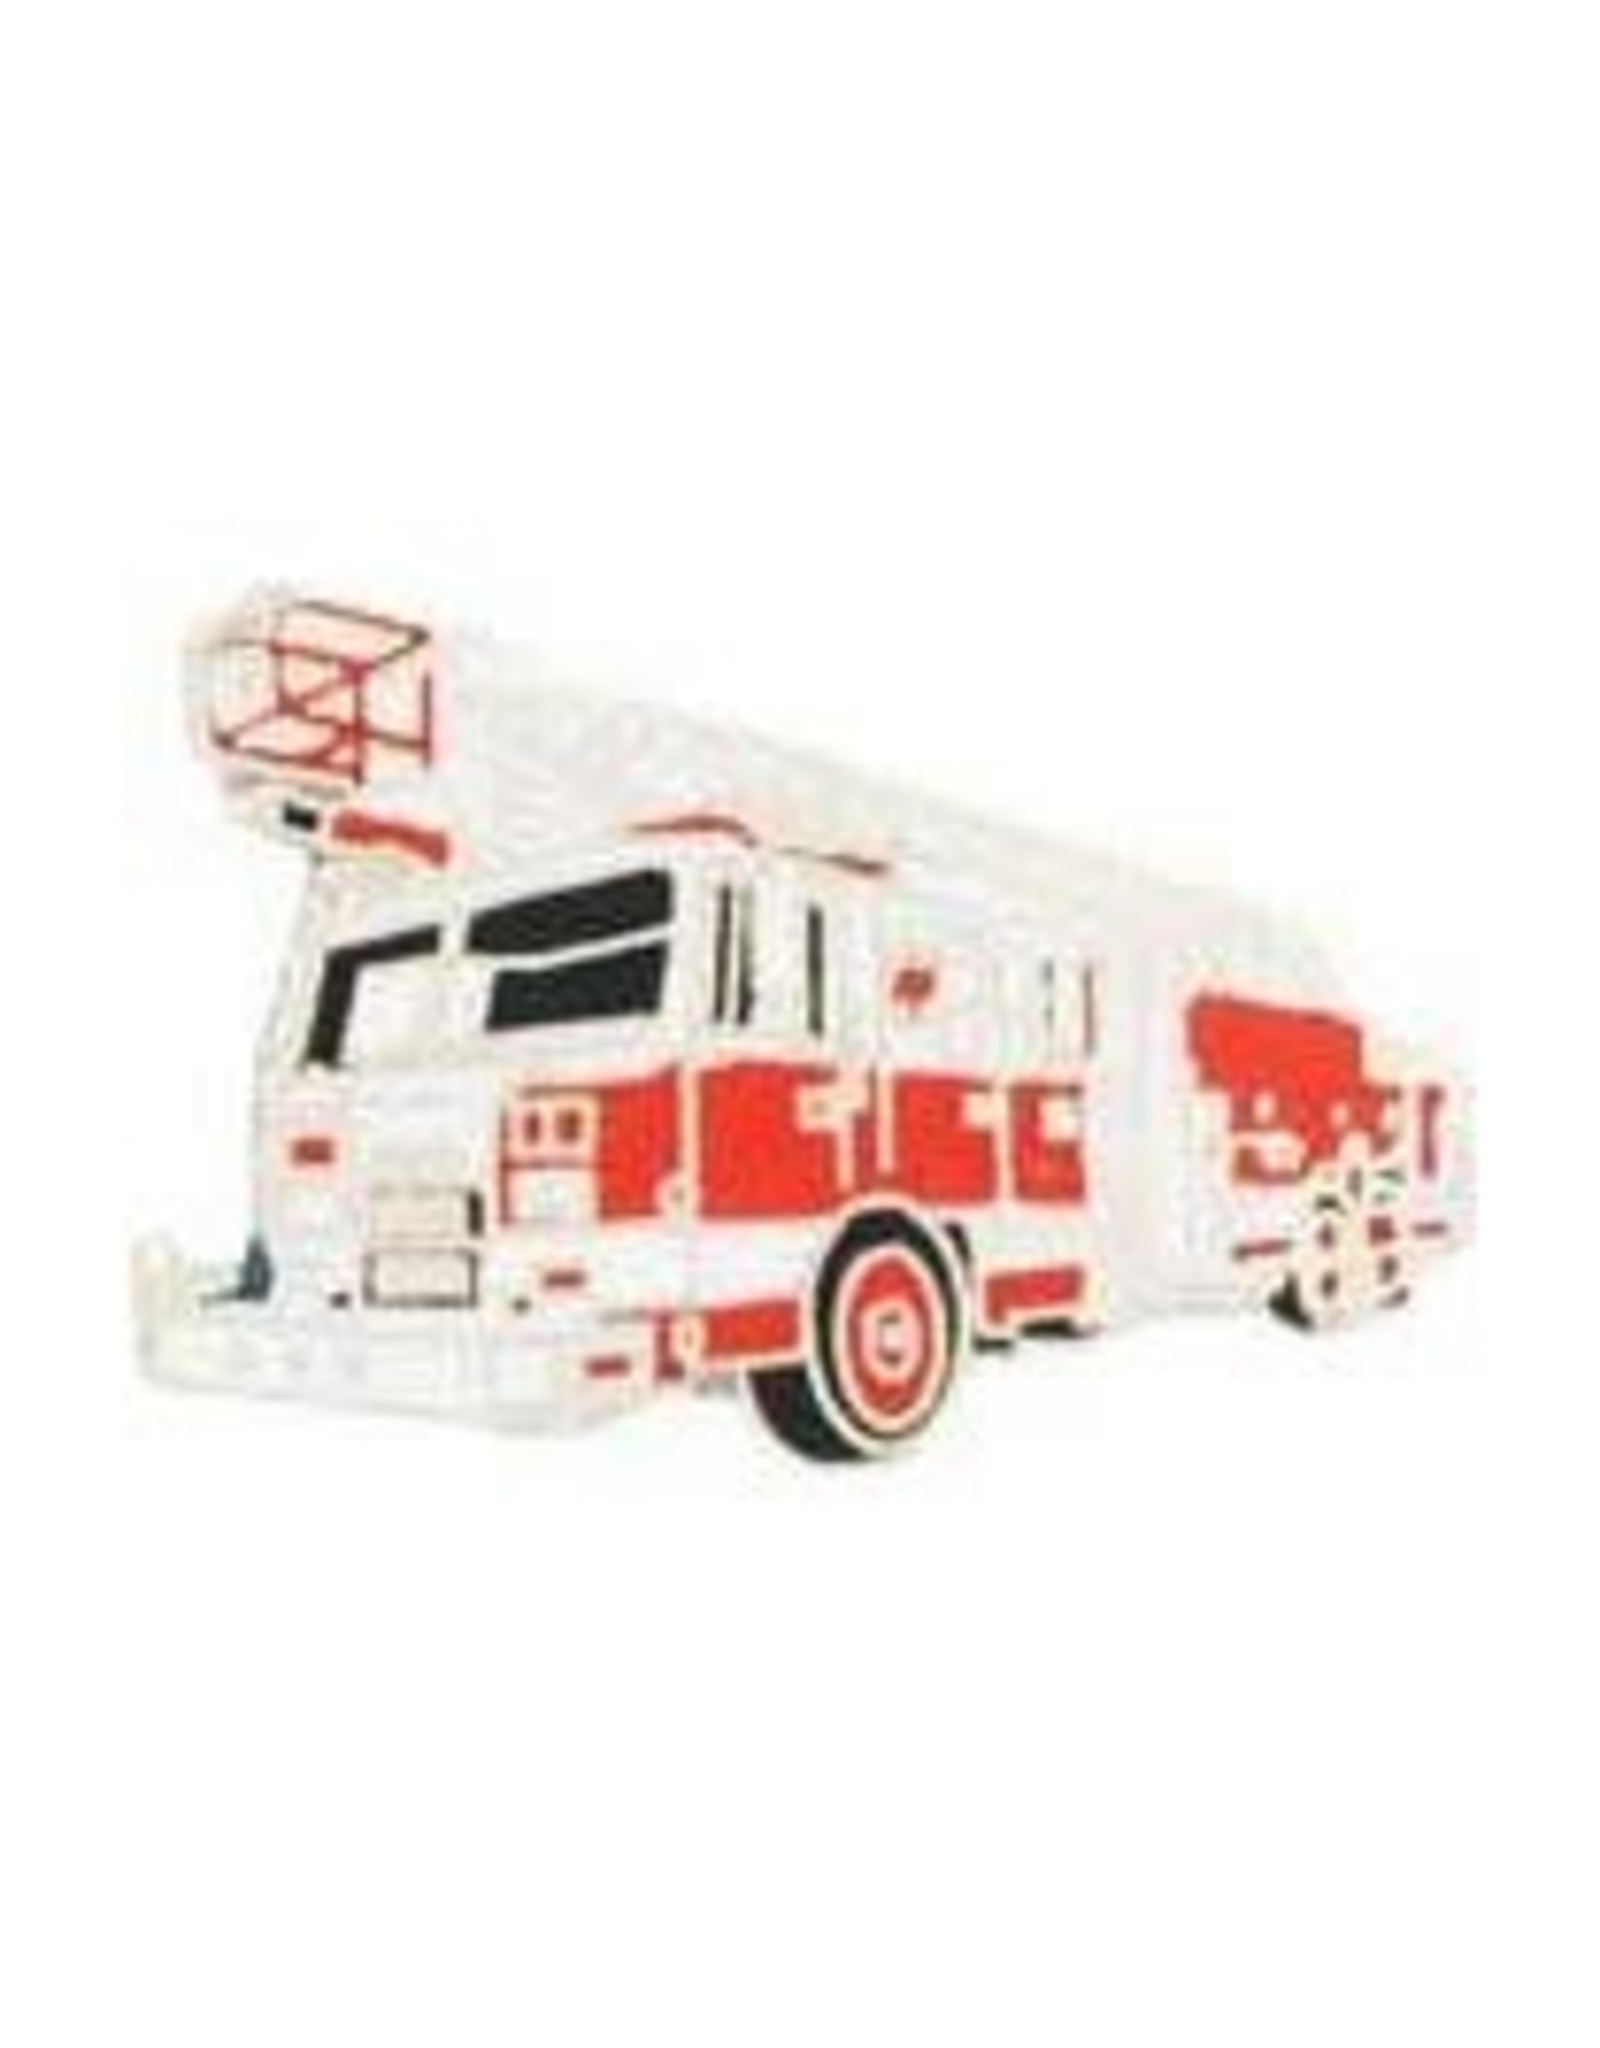 Pin - Vehicle Fire Truck Red 1500 GPM